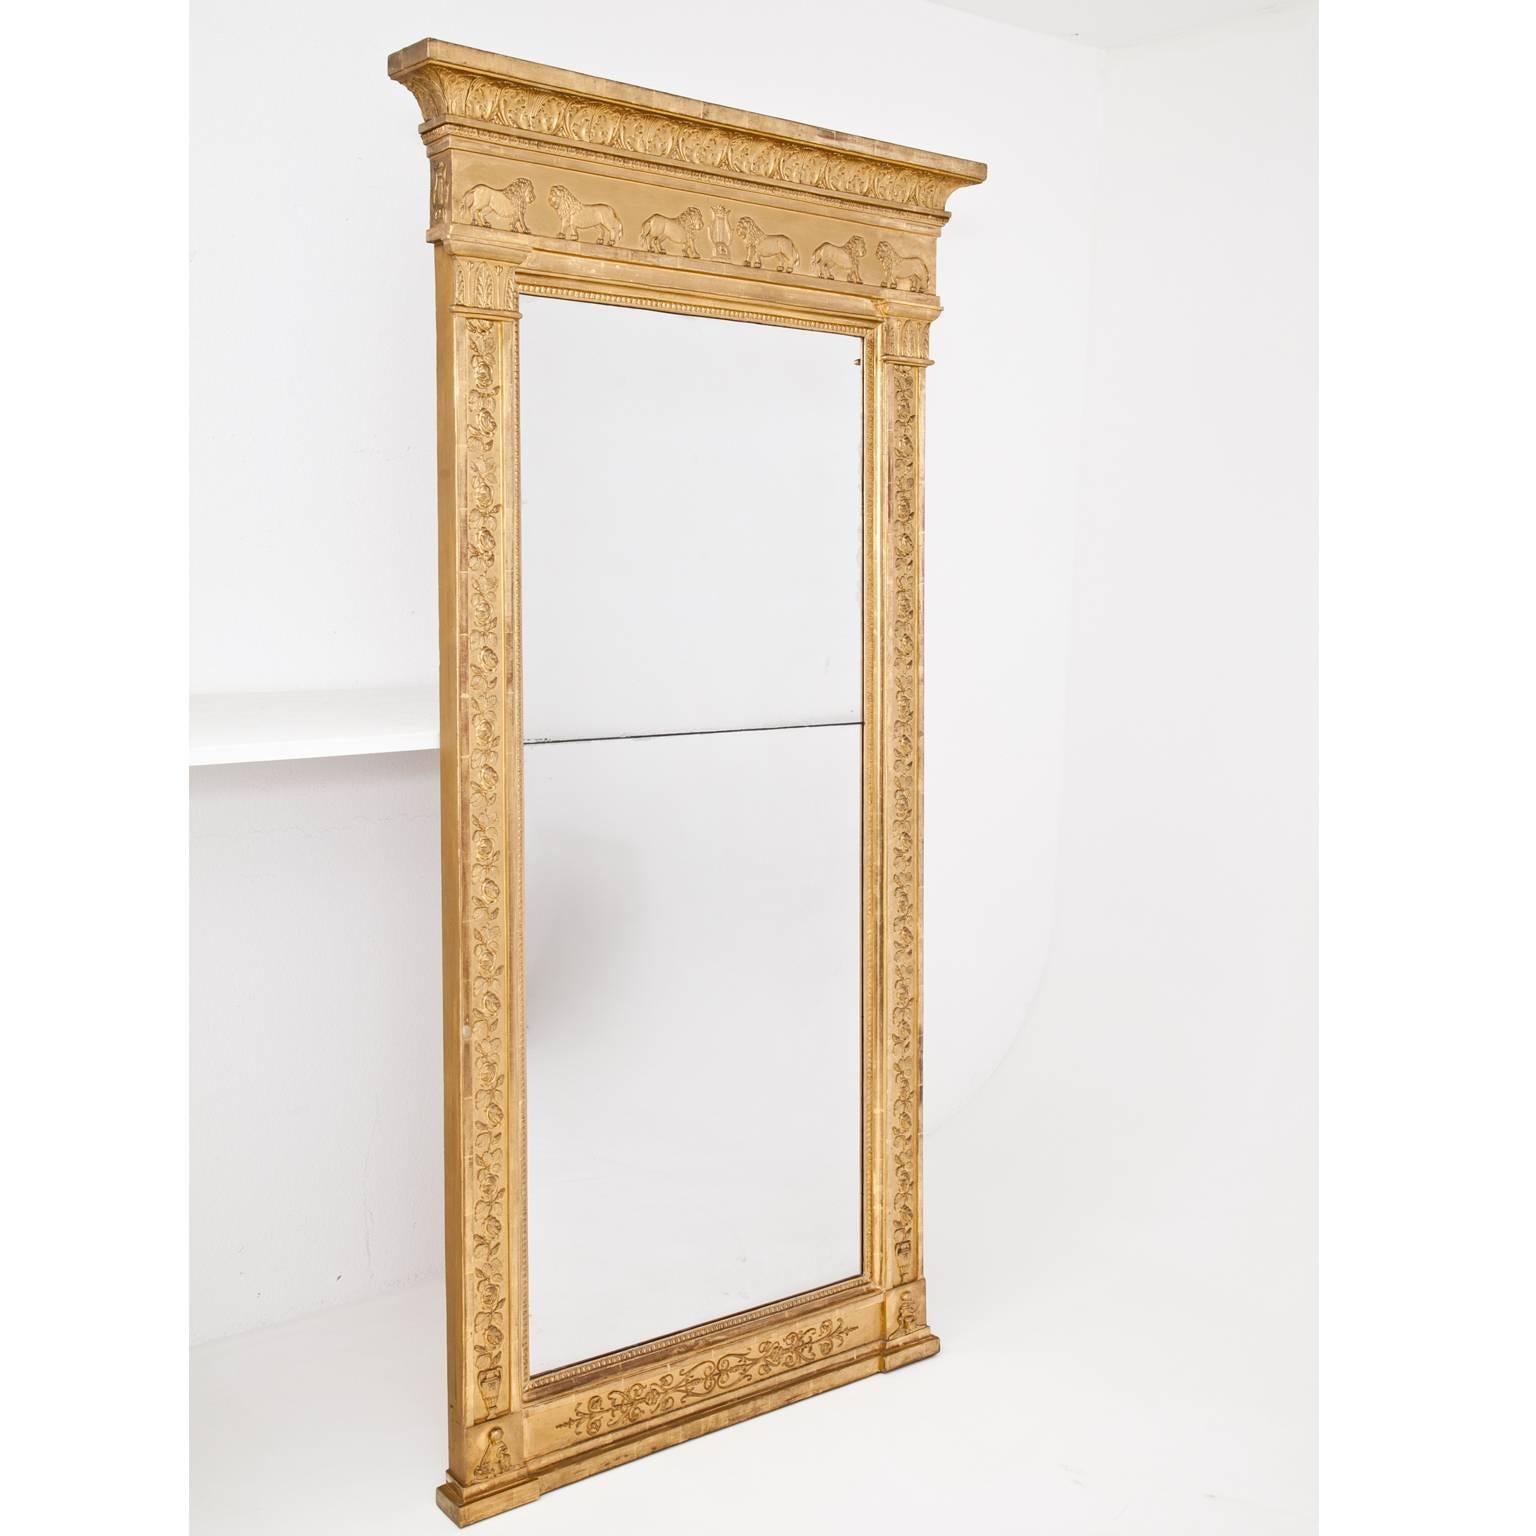 Large neoclassical wall mirror in a gilt wooden frame, decorated with rose-garlands, capitals and pacing lions as well as small cupids with fruit baskets and flutes. Gilding is original, the old mirror is divided in the middle. Mirror size: 157 x 66